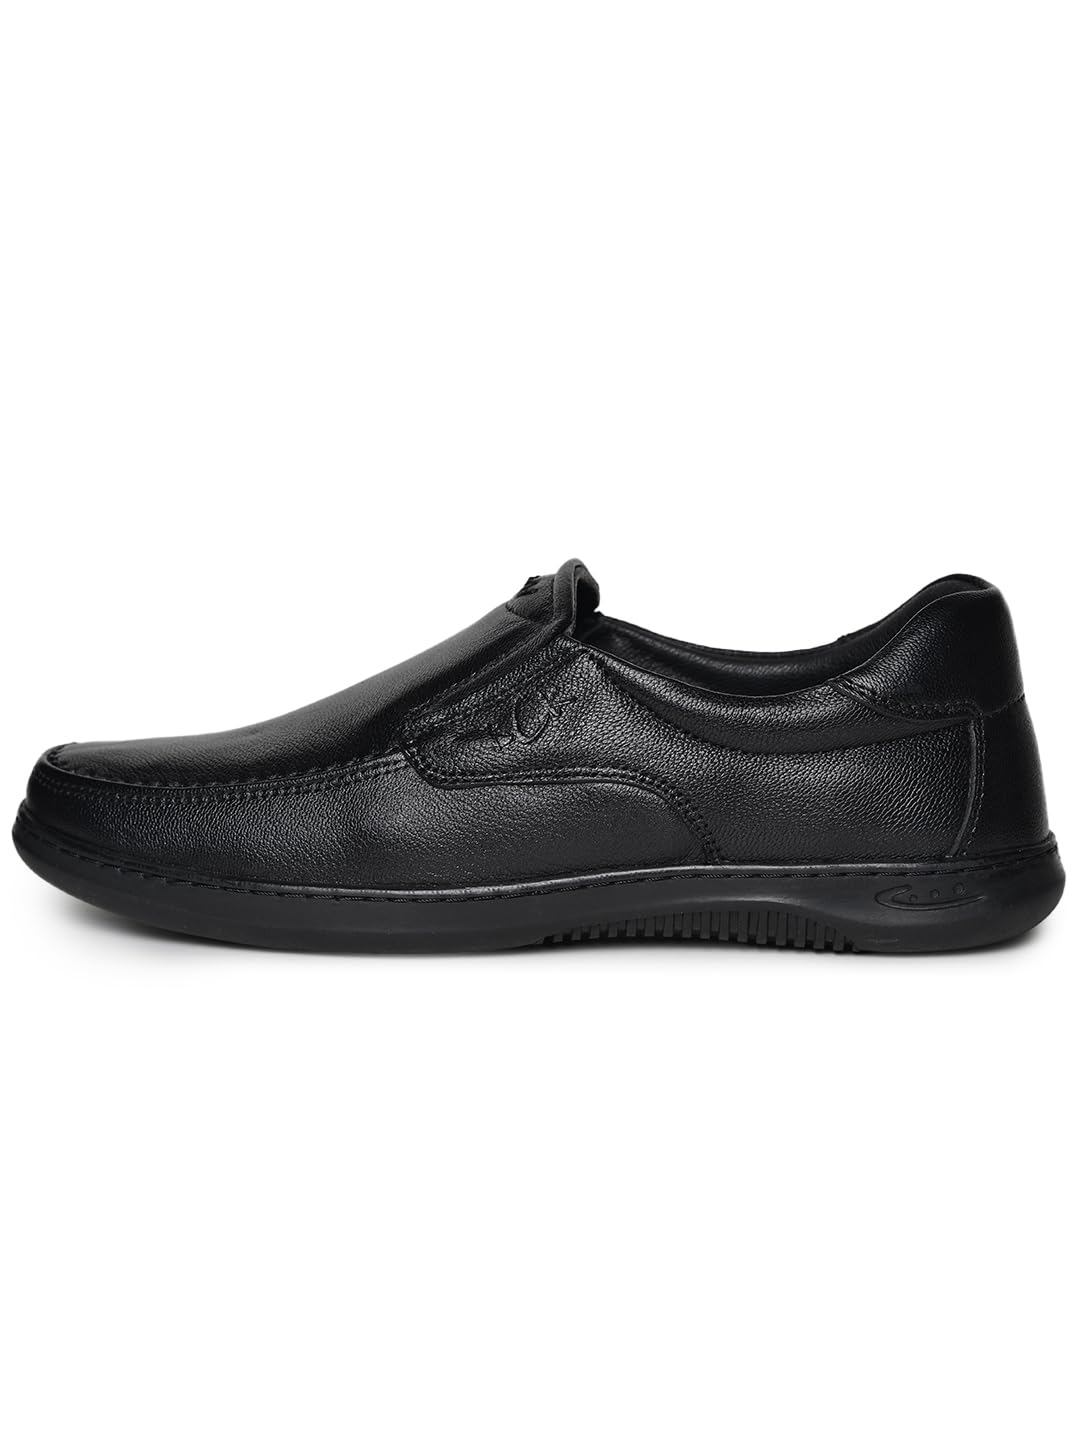 Errol Genuine Leather Casual Shoes for Mens (Black, 42) 